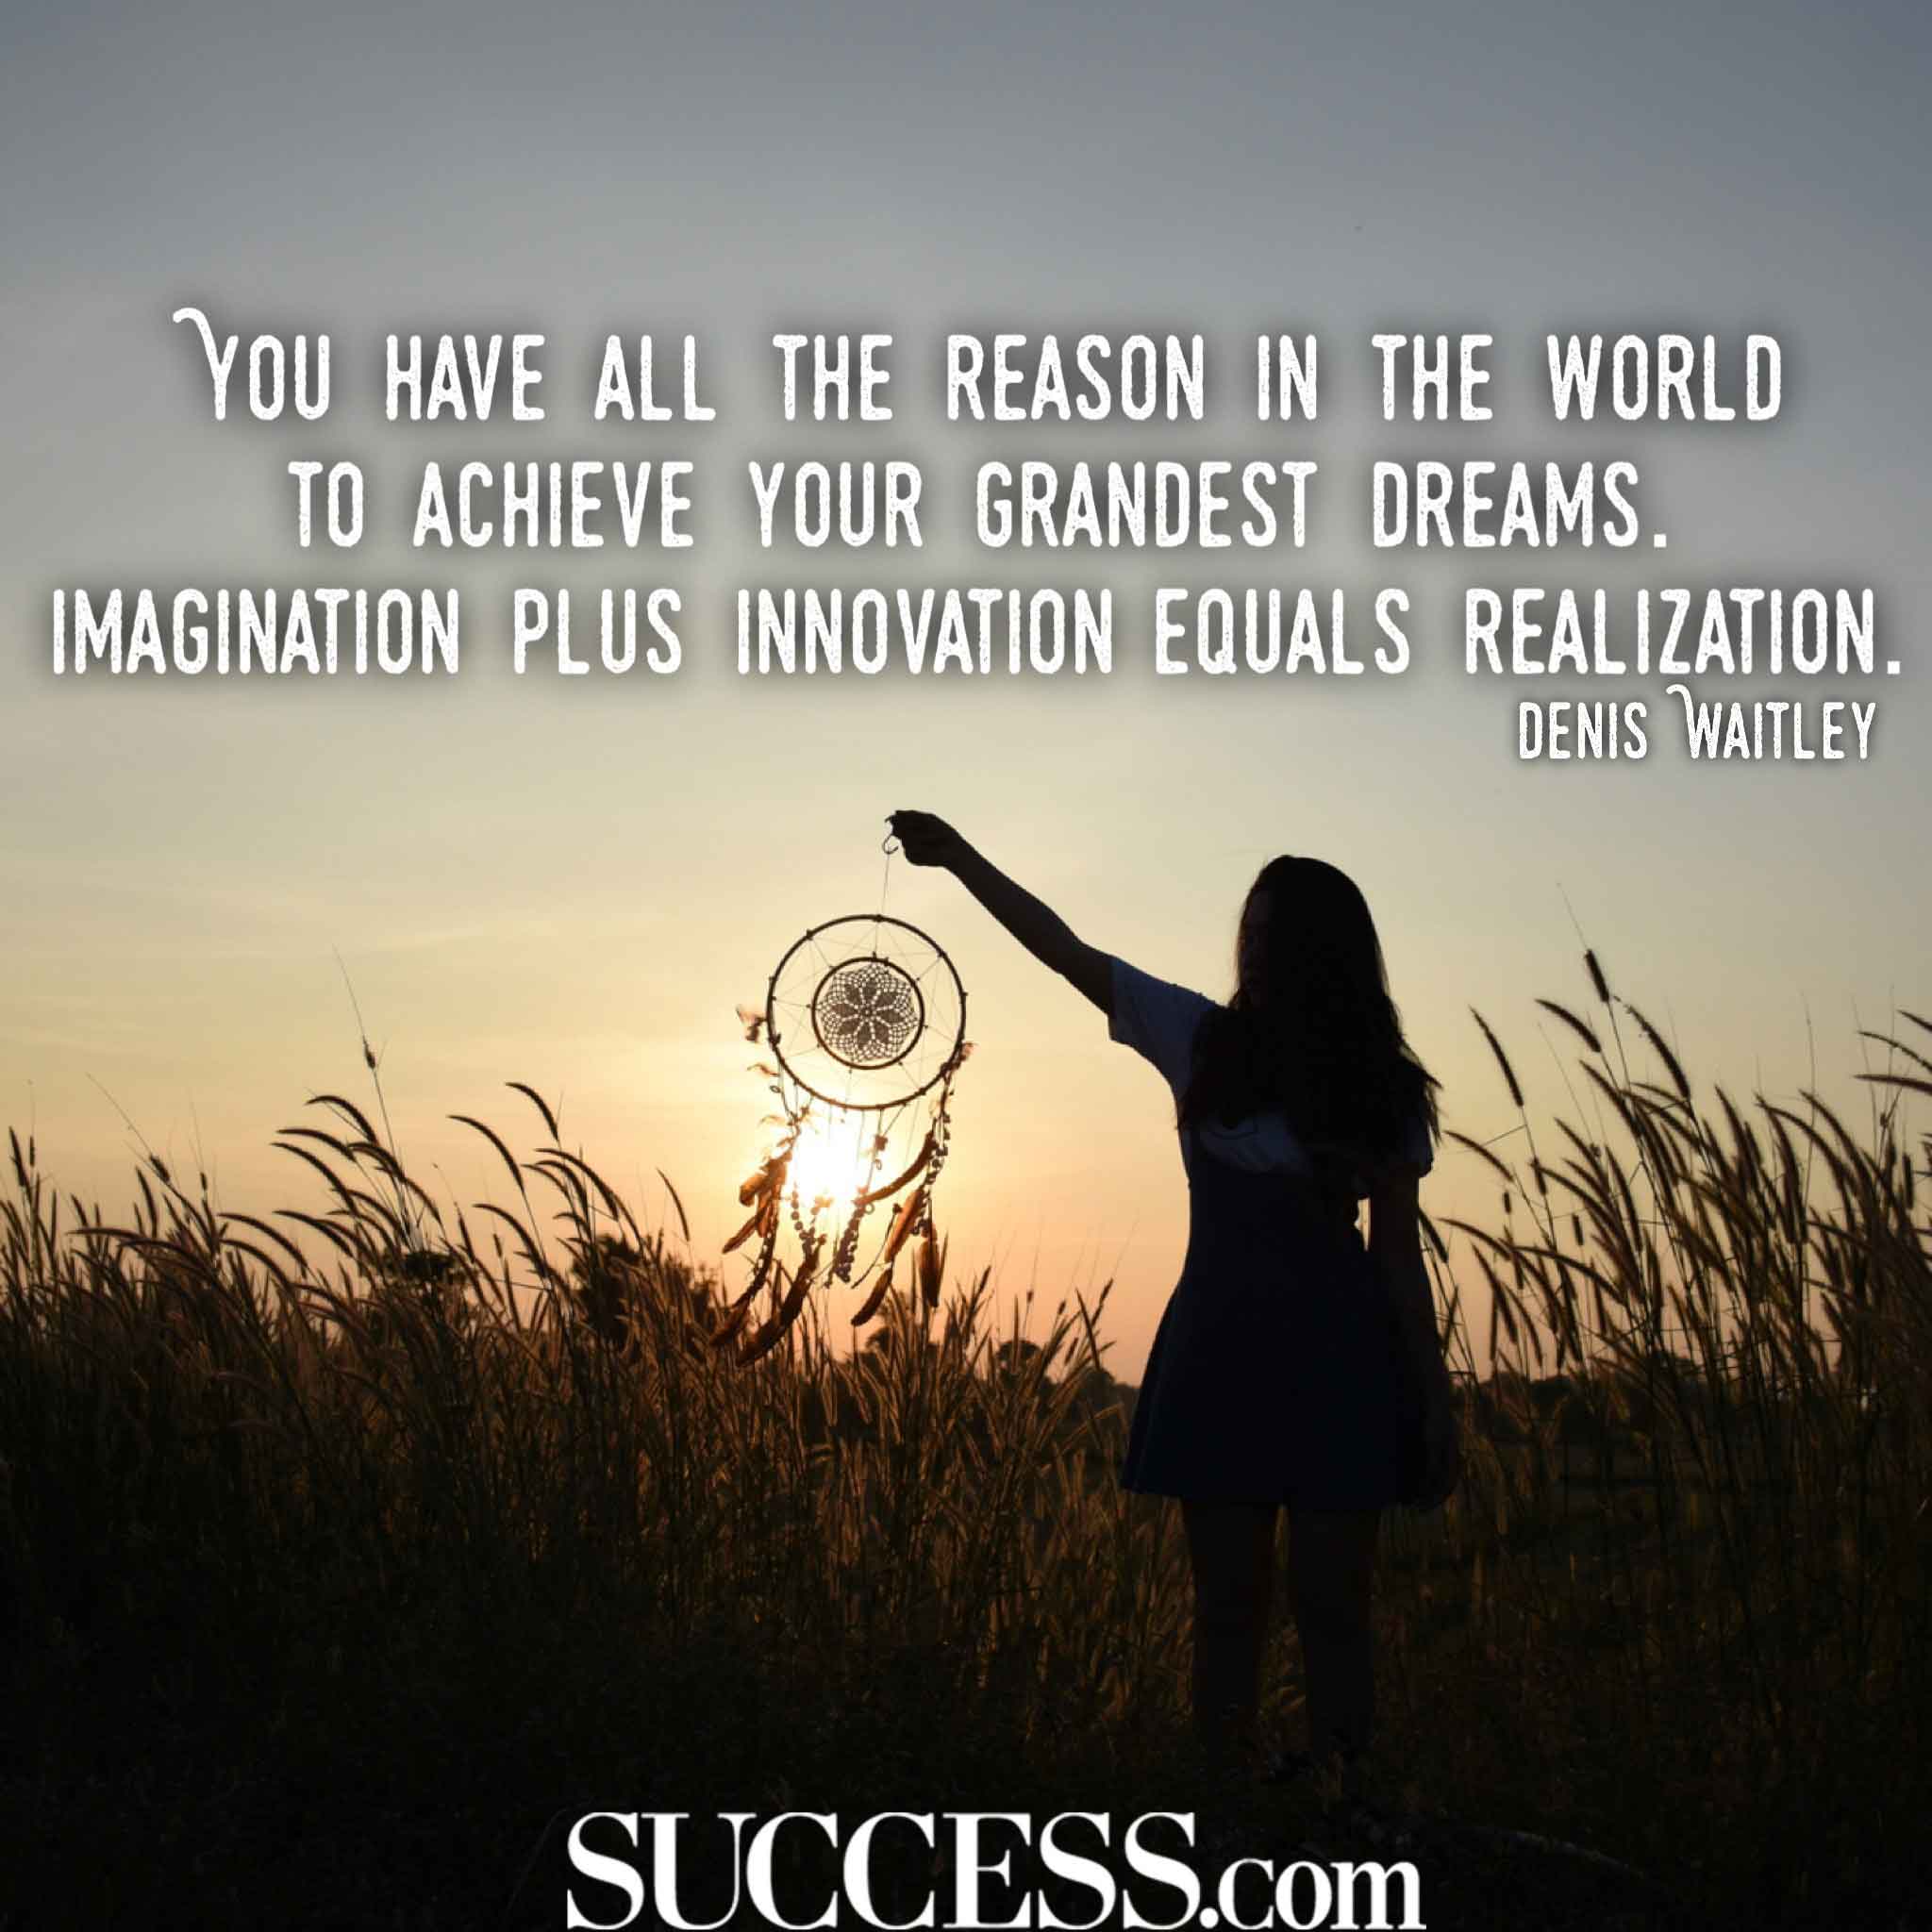 You have the reason in the world to achieve your grandest dreams imagination plus innovation equals realization – Denis Waitley